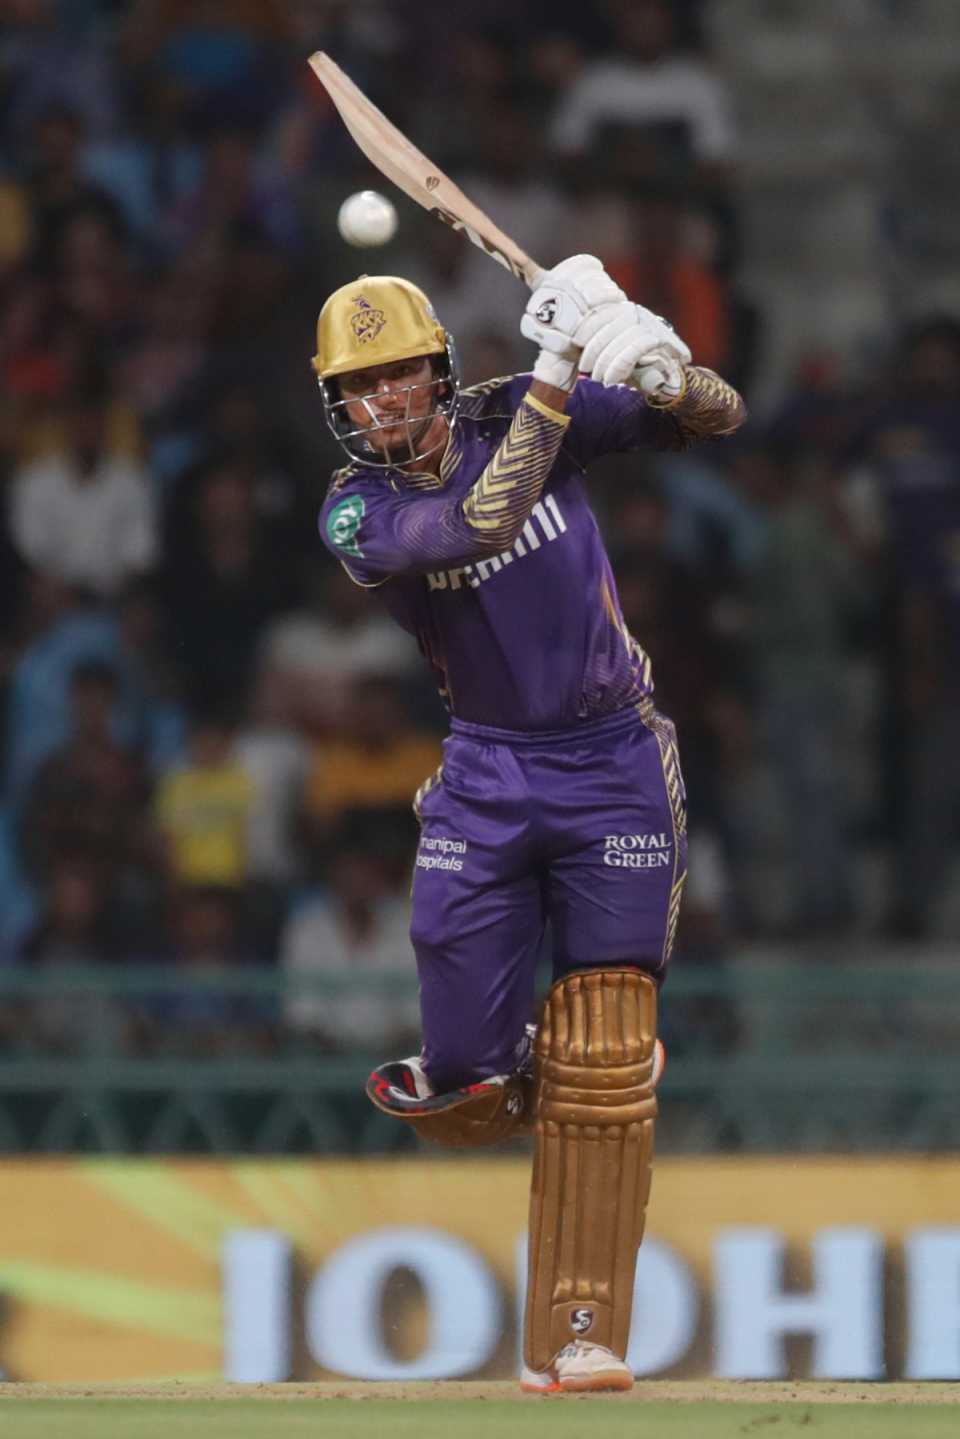 Angkrish Raghuvanshi played second fiddle to Sunil Narine in a key stand